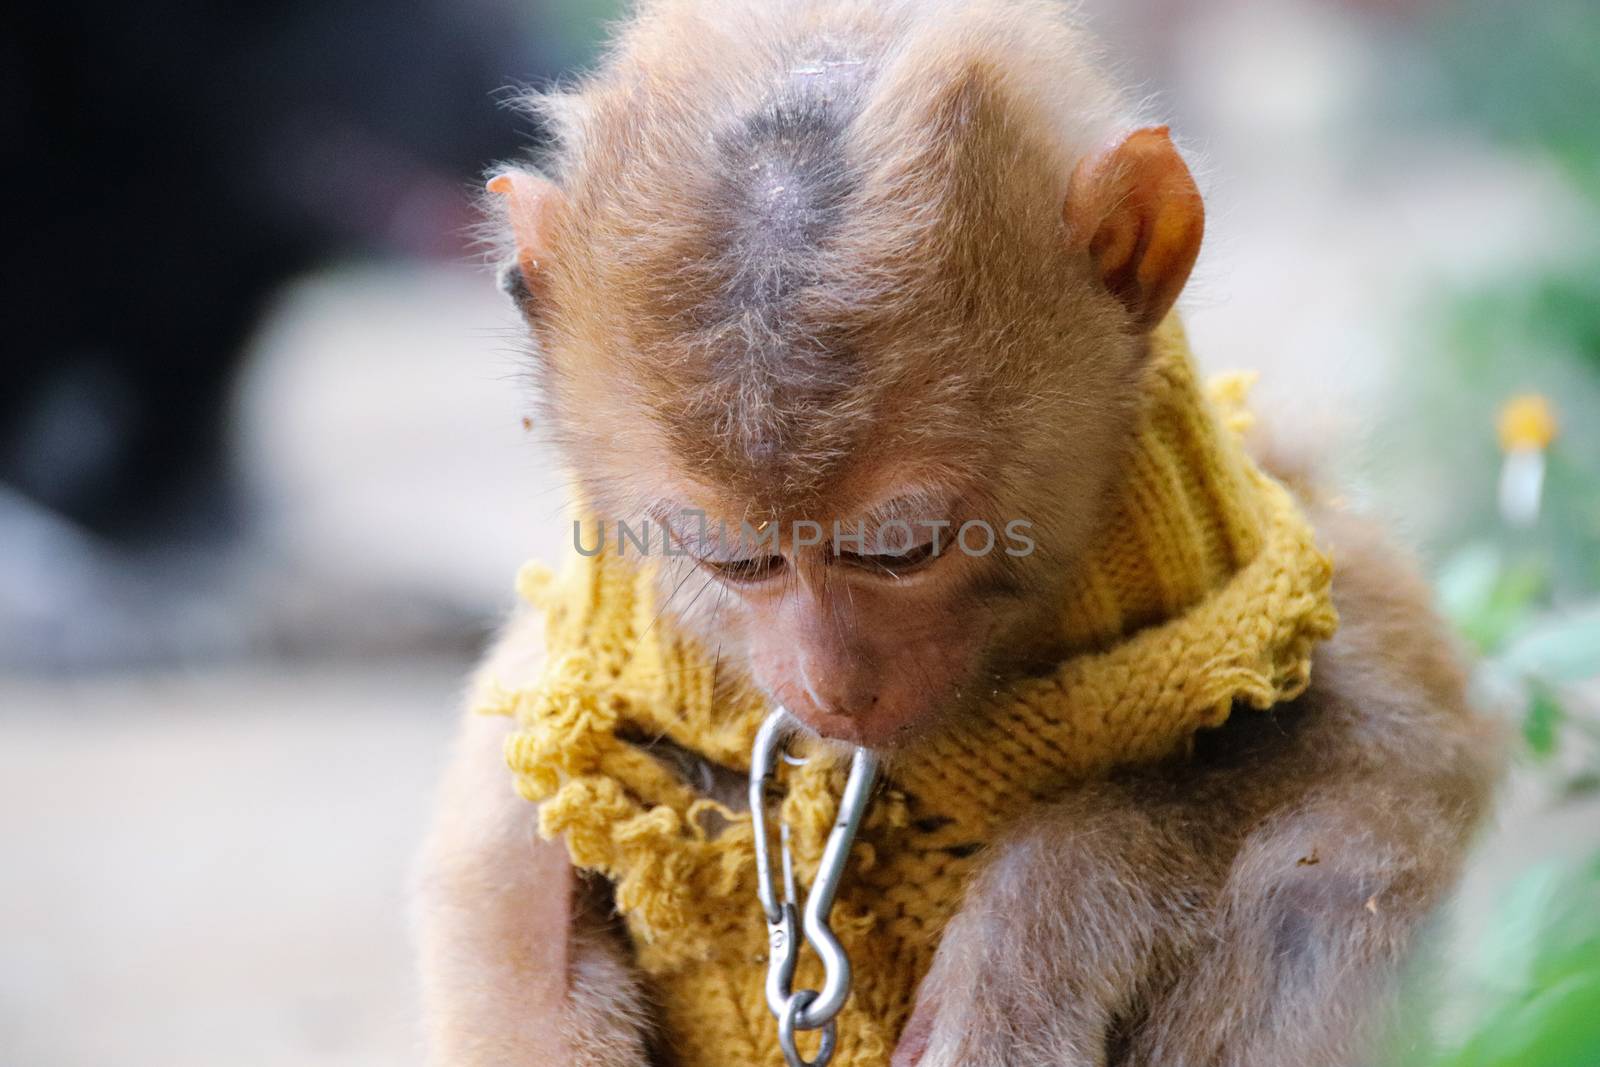 A baby monkey in chains by Sonnet15